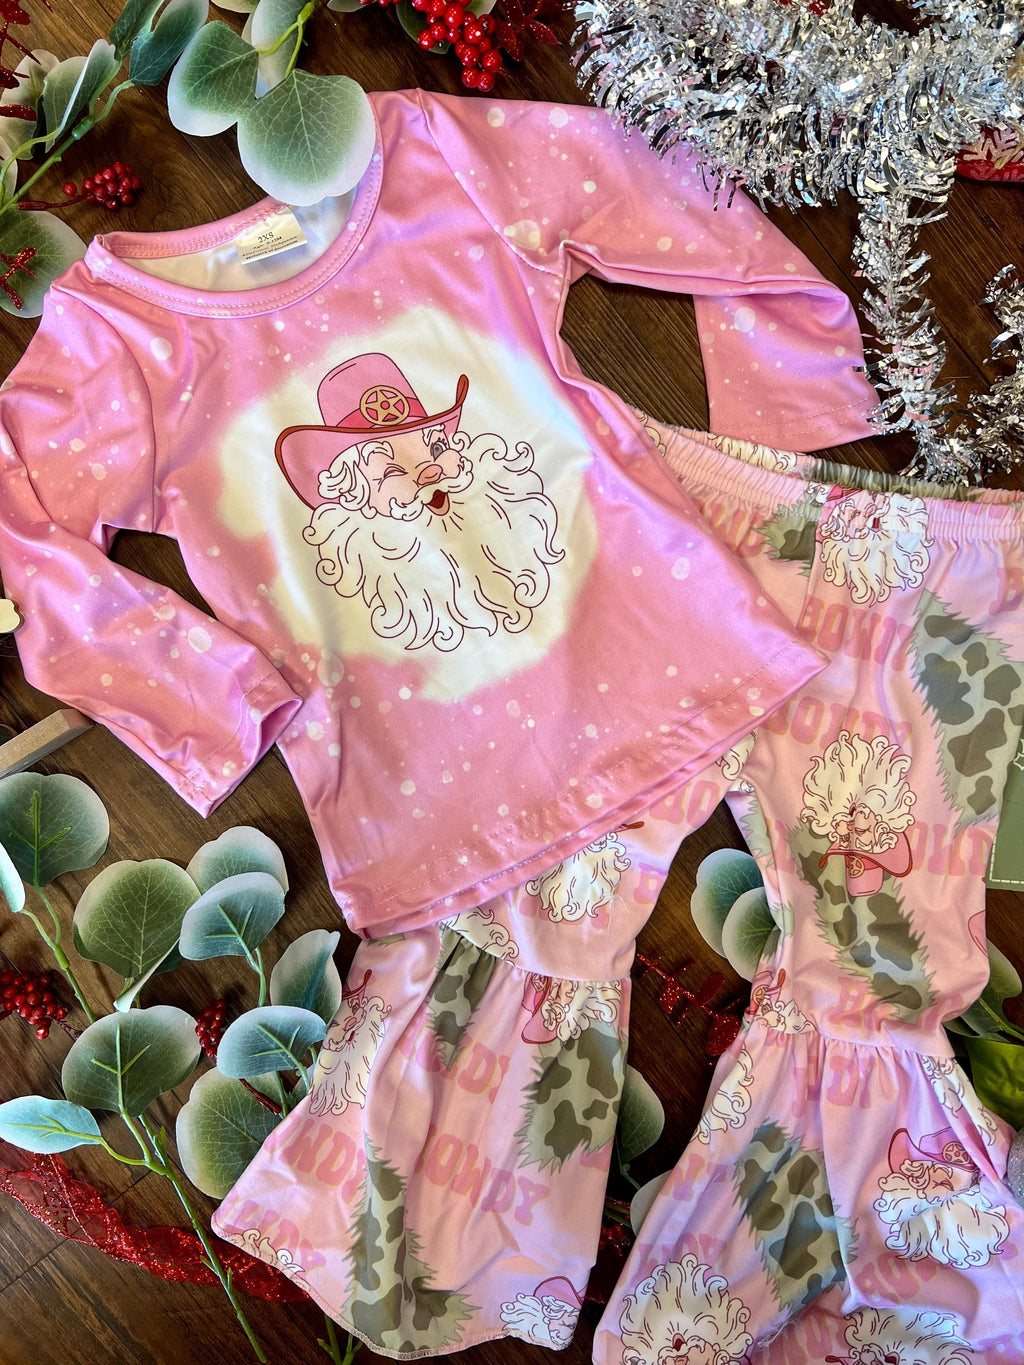 This festive Howdy Pink Santa Two Piece Set is irresistible! The butter soft cotton blend with playful Vintage Santa Claus, Christmas trees, and flared Bells will look oh-so-cute on your little one. Spread some Christmas cheer and make this holiday season one for the books!! 95% Cotton 5% Spandex. Ho Ho Ho!